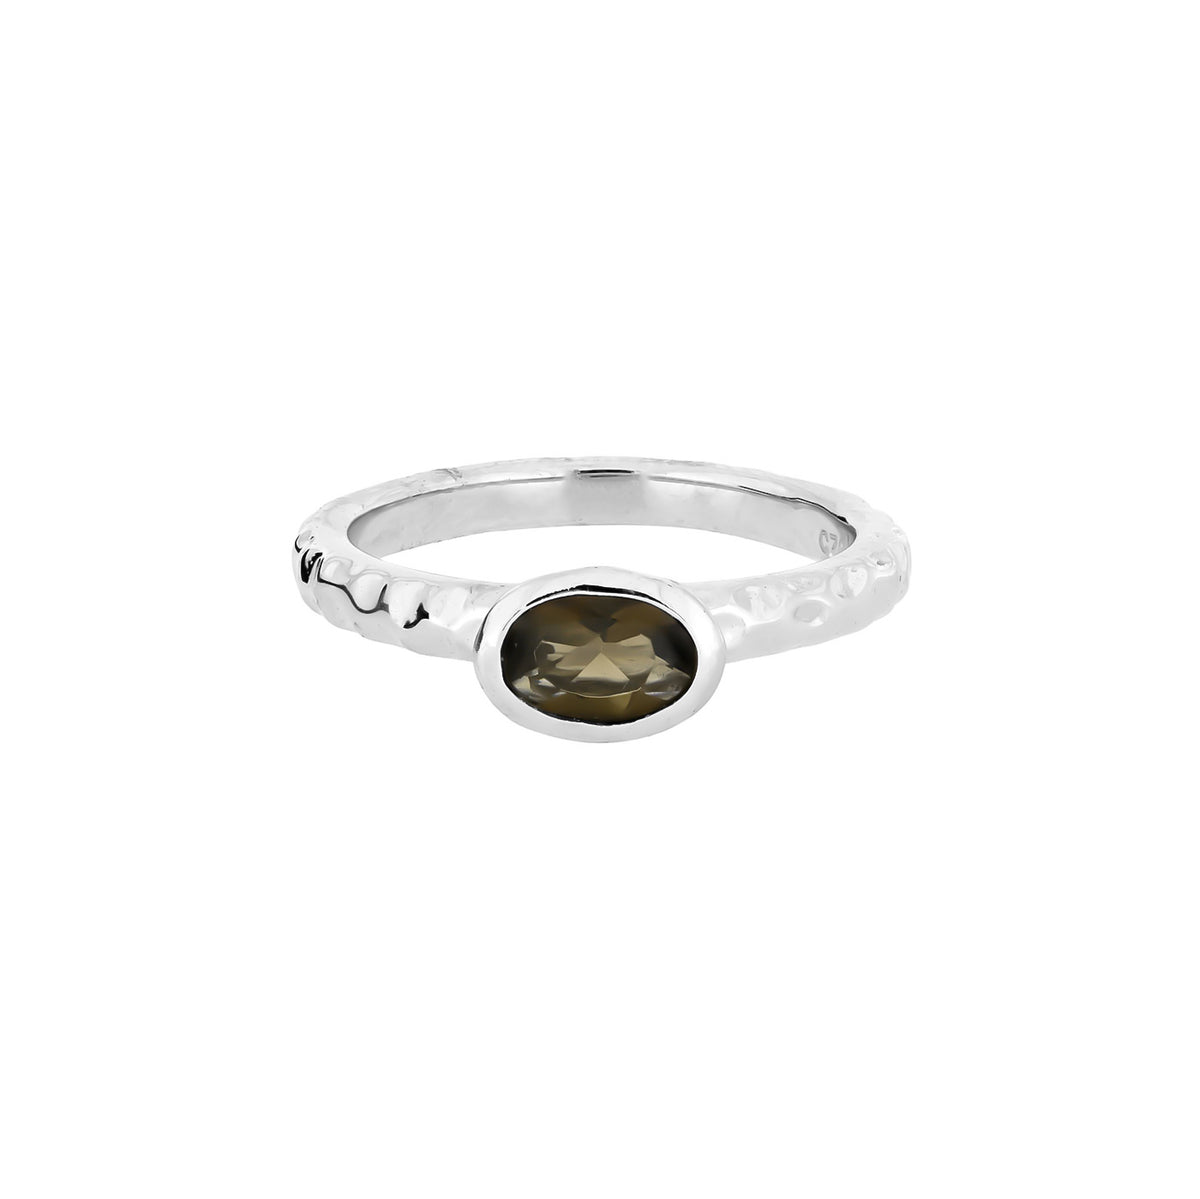 Oval Smoky Quartz Textured Stacking Ring